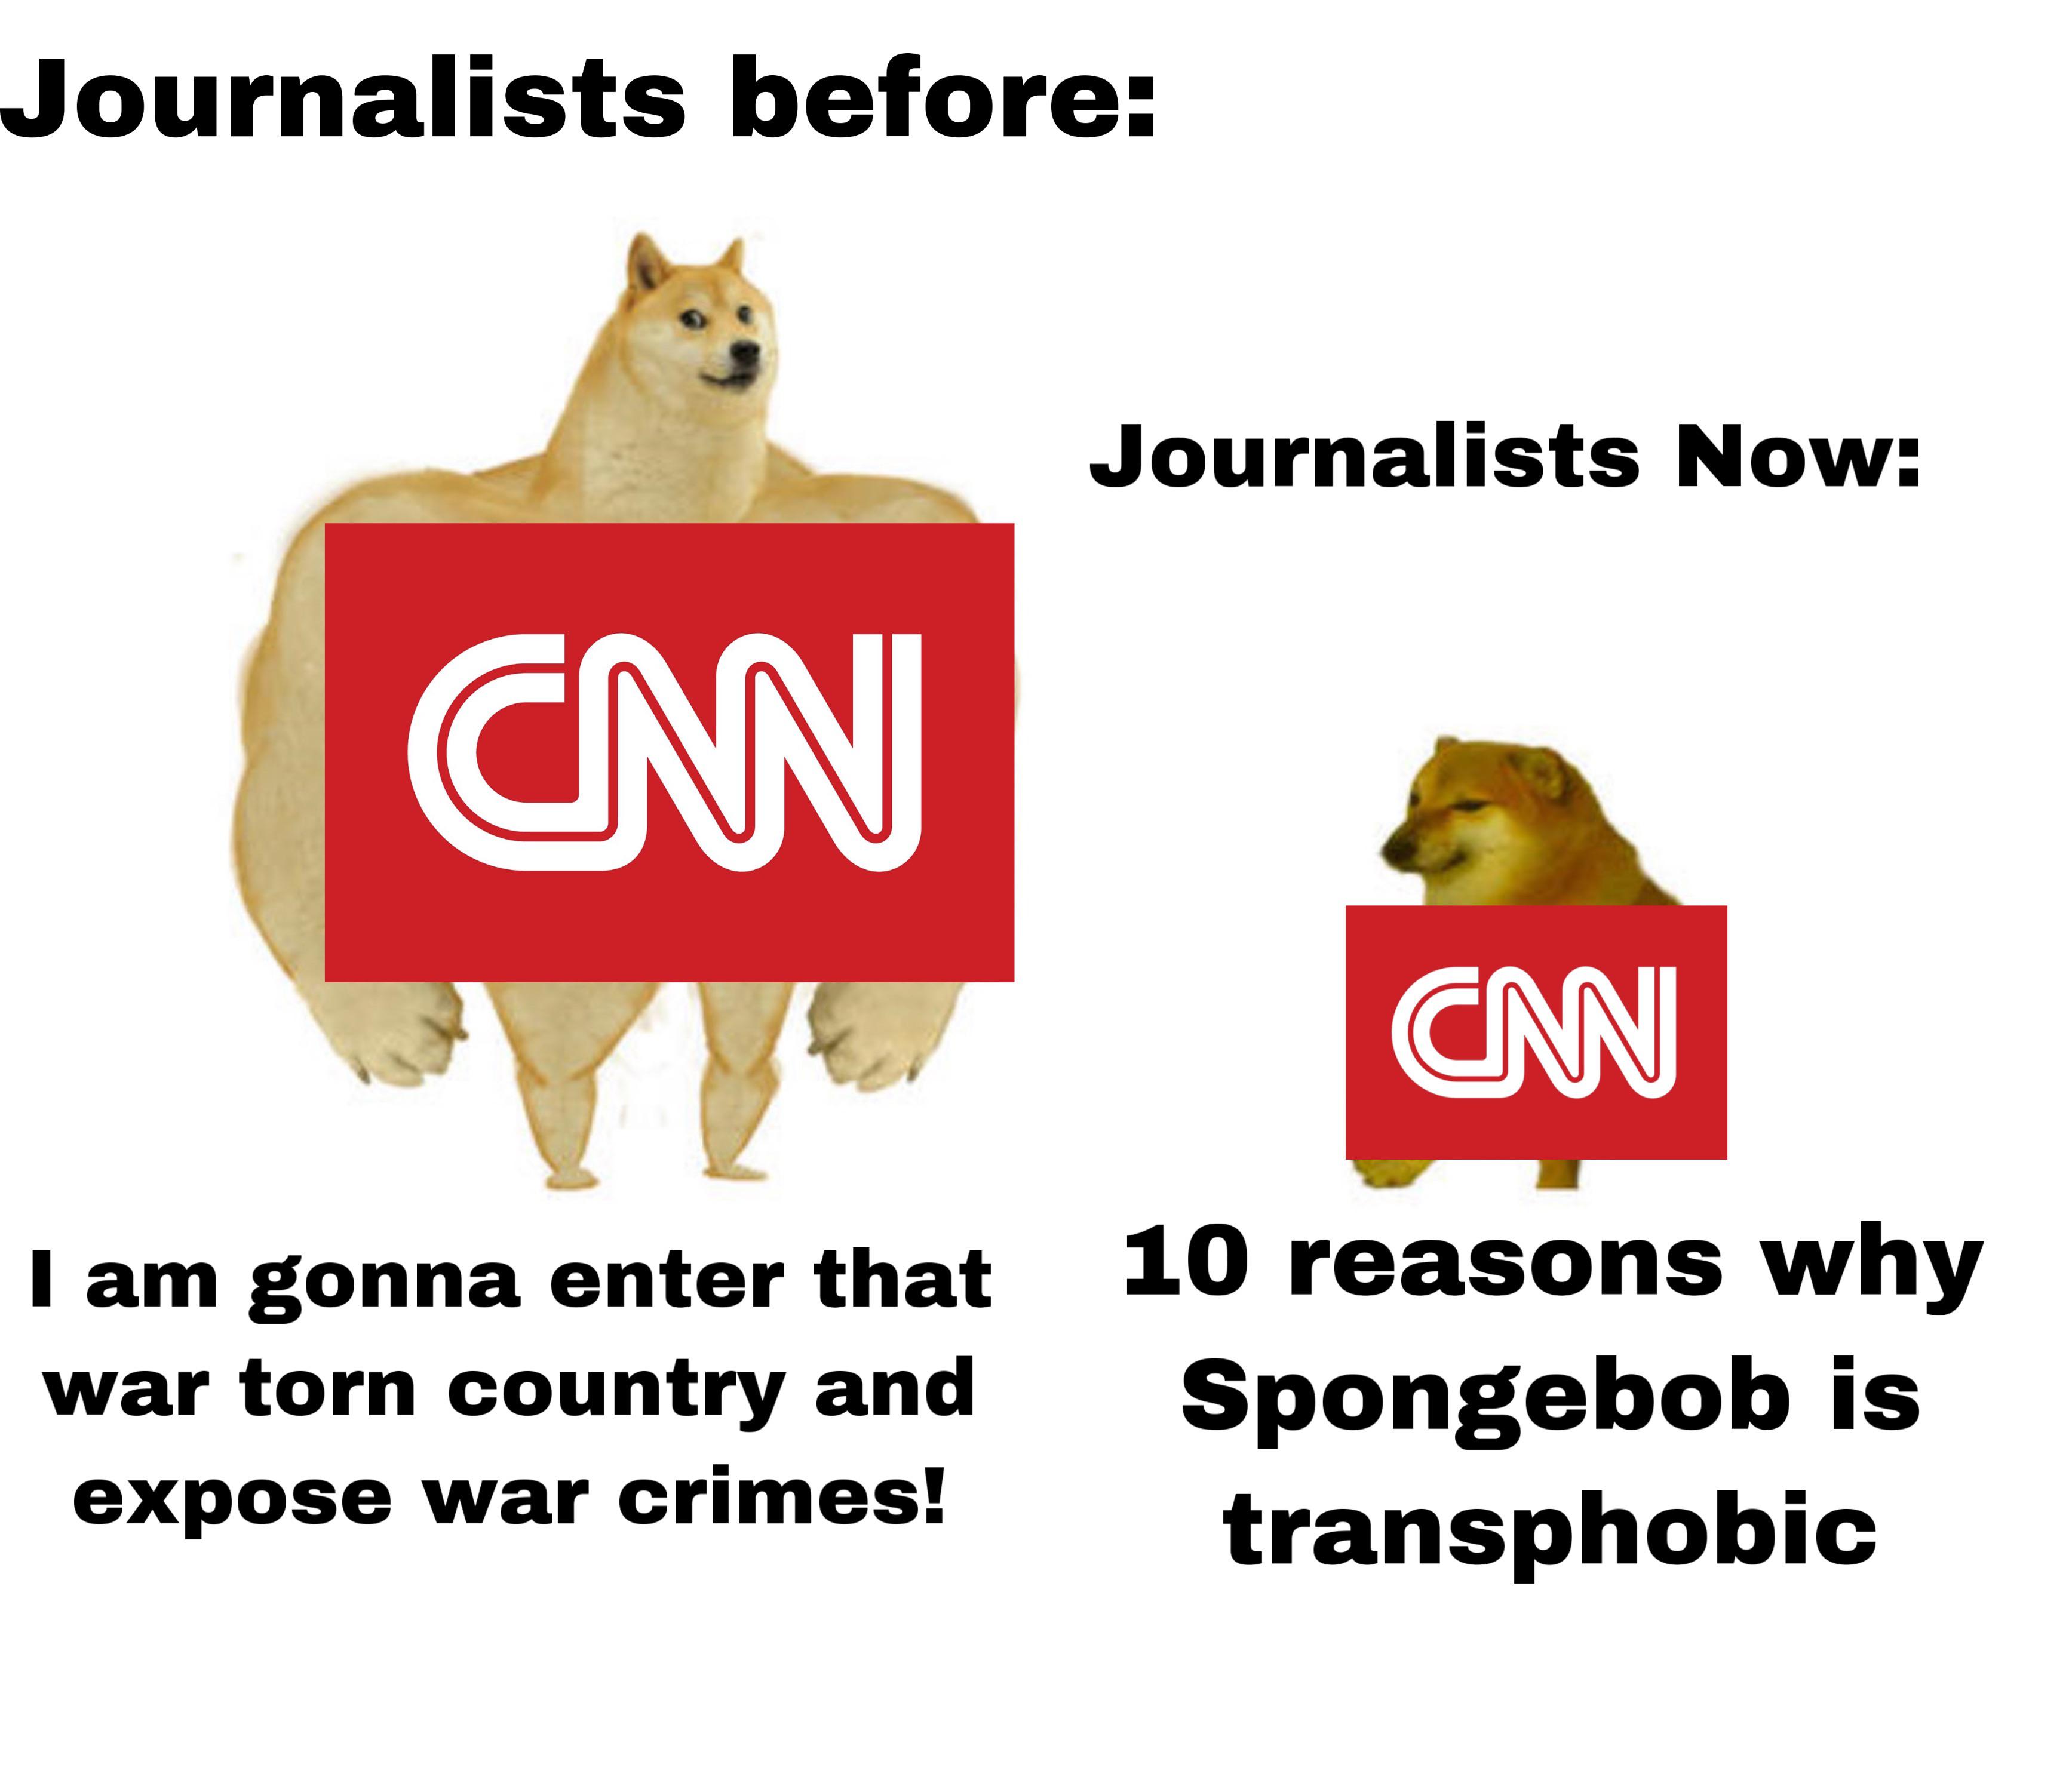 dank memes - cnn - Journalists before Journalists Now Cm Mni I am gonna enter that war torn country and expose war crimes! 10 reasons why Spongebob is transphobic